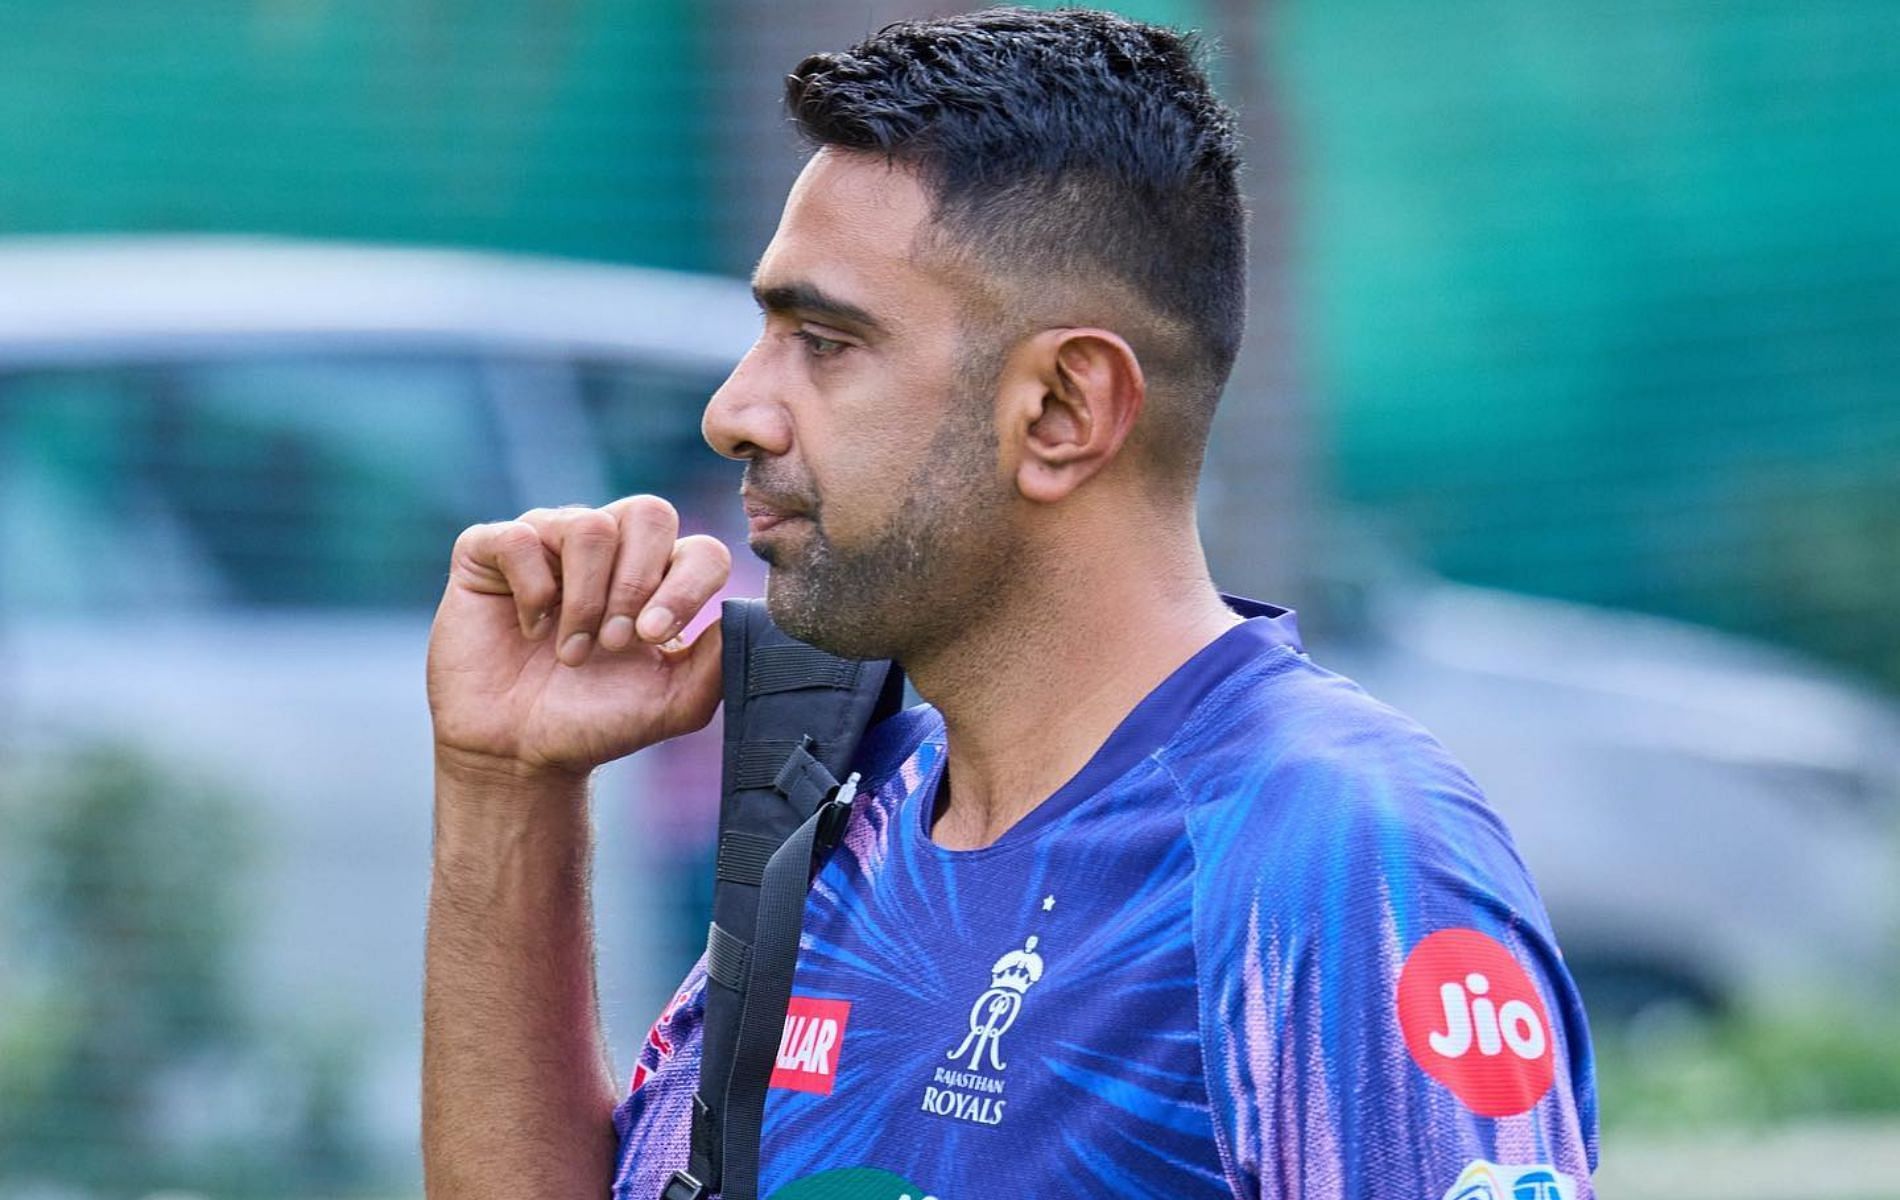 Ravichandran Ashwin was retained by RR ahead of IPL 2023 auction. (Pic: Twitter)